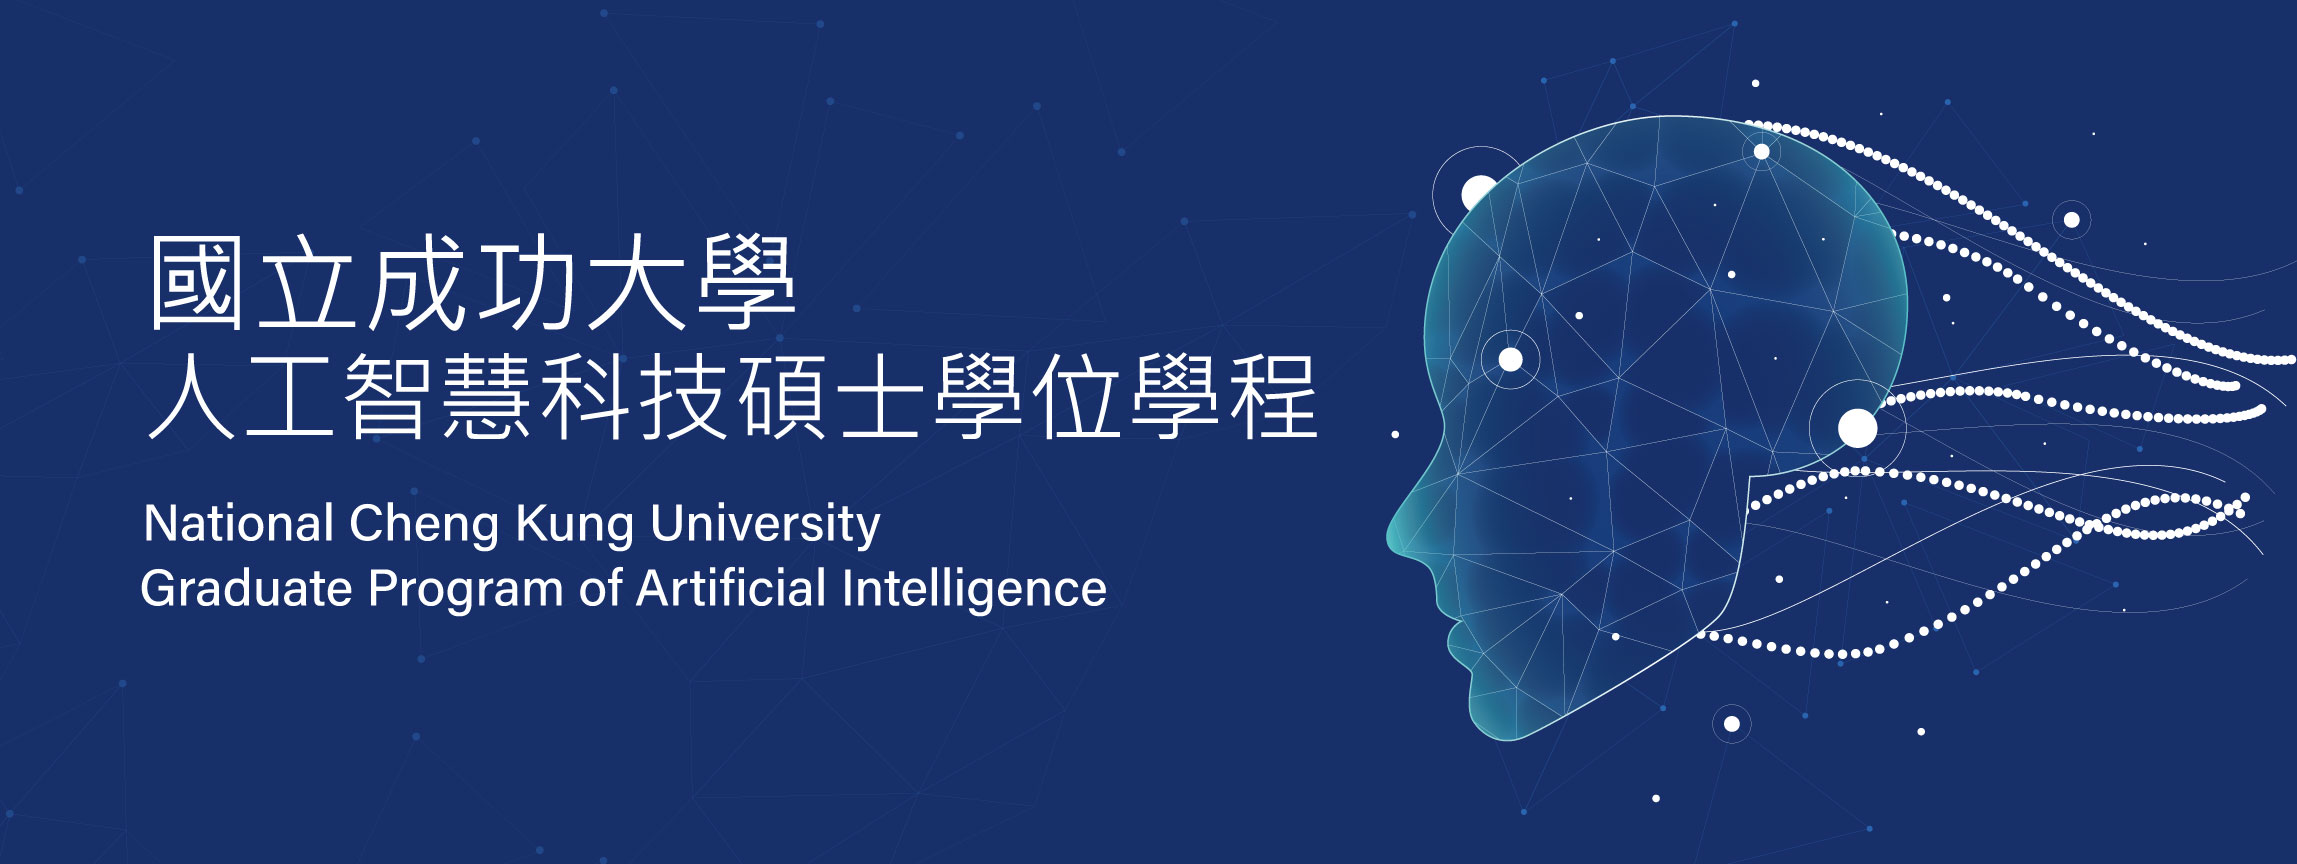 Welcom to Master Degree Program on Artificial Intelligence